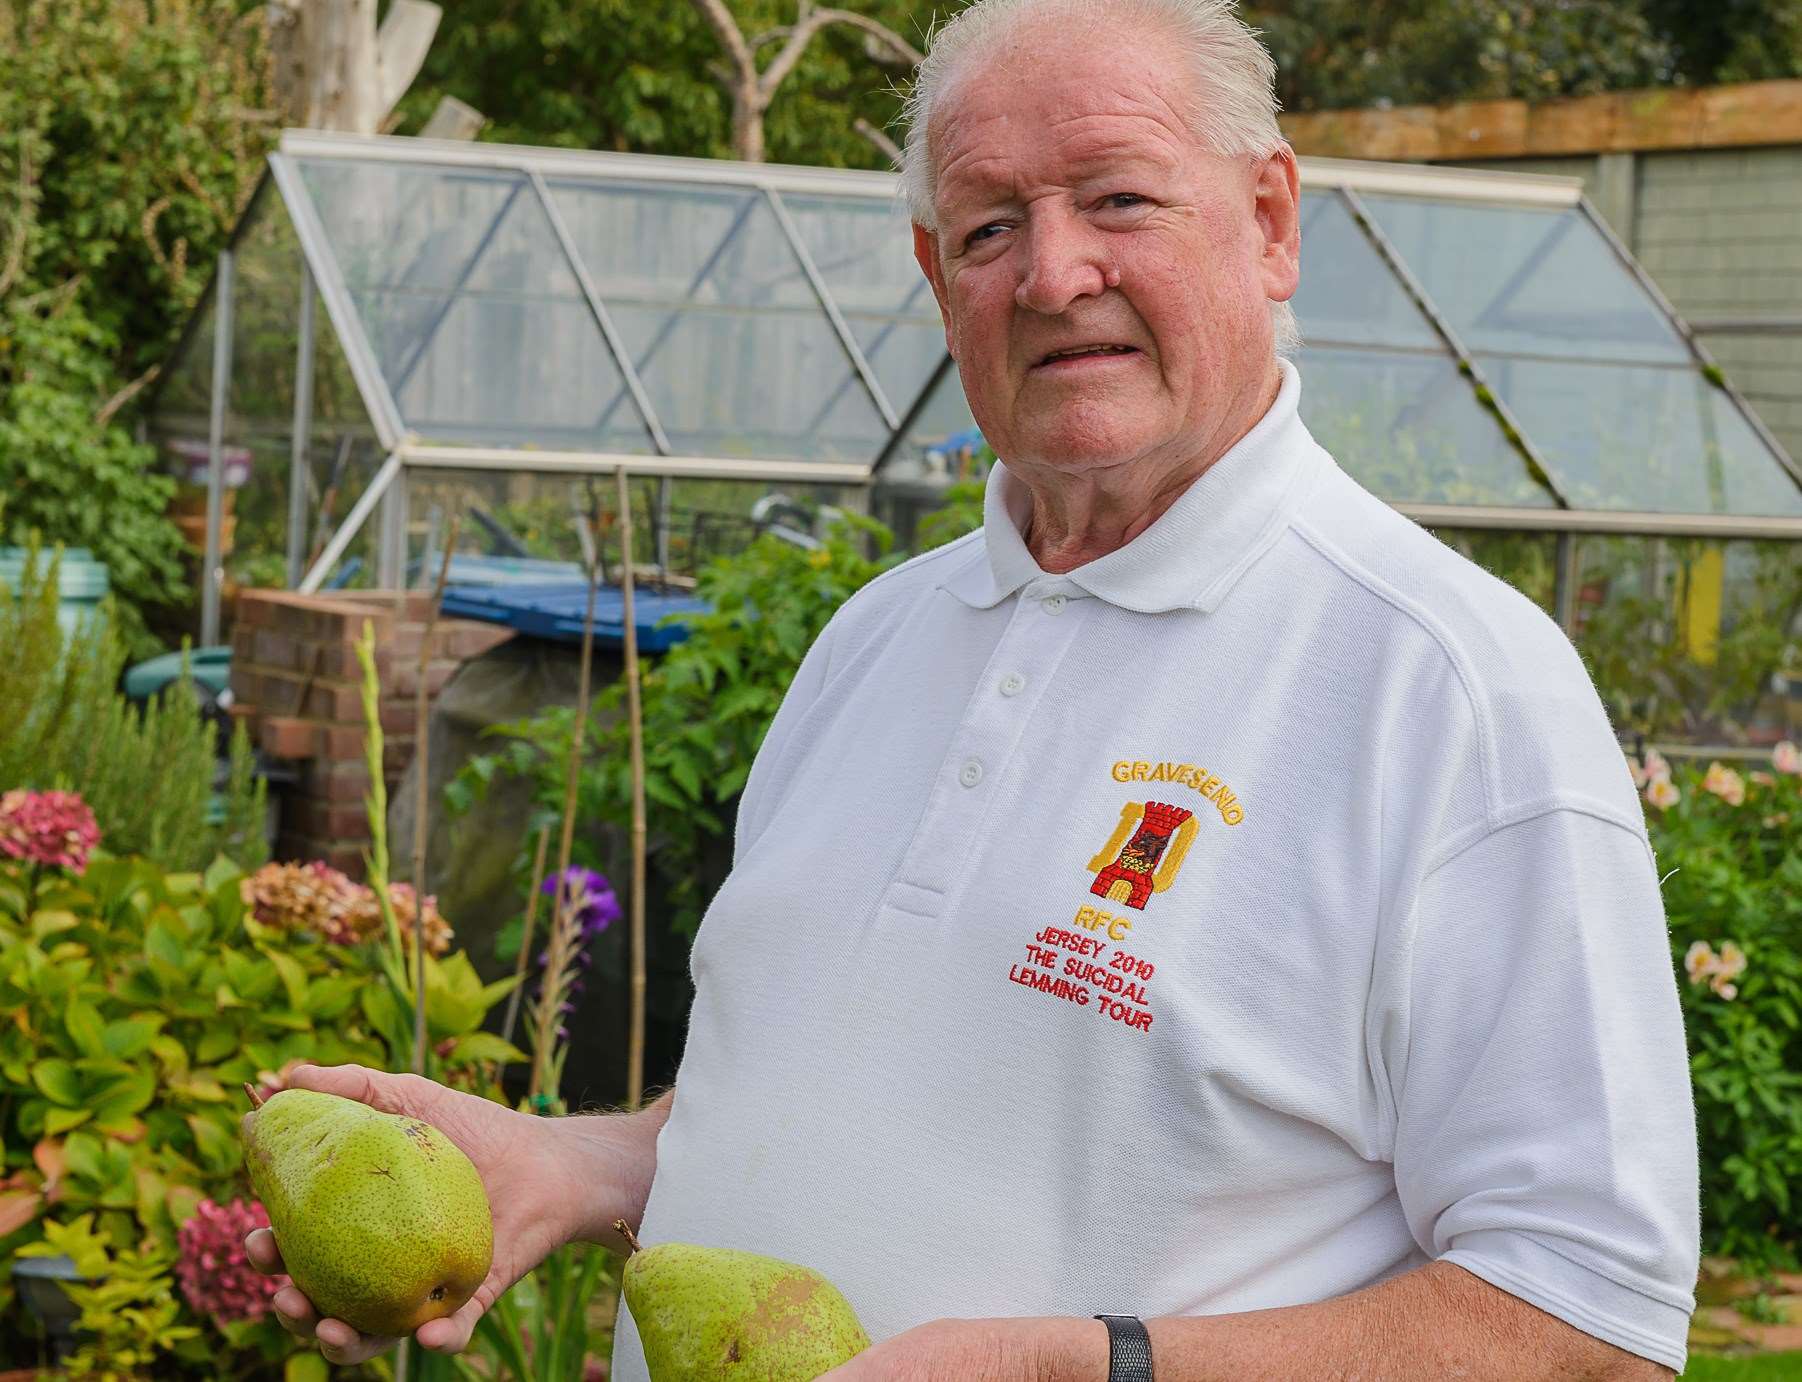 Terry Medes with the pear tree that he purchased from Aldi, Gravesend, Kent in 2015 for £3.49, which is now providing a bumper crop of large pears